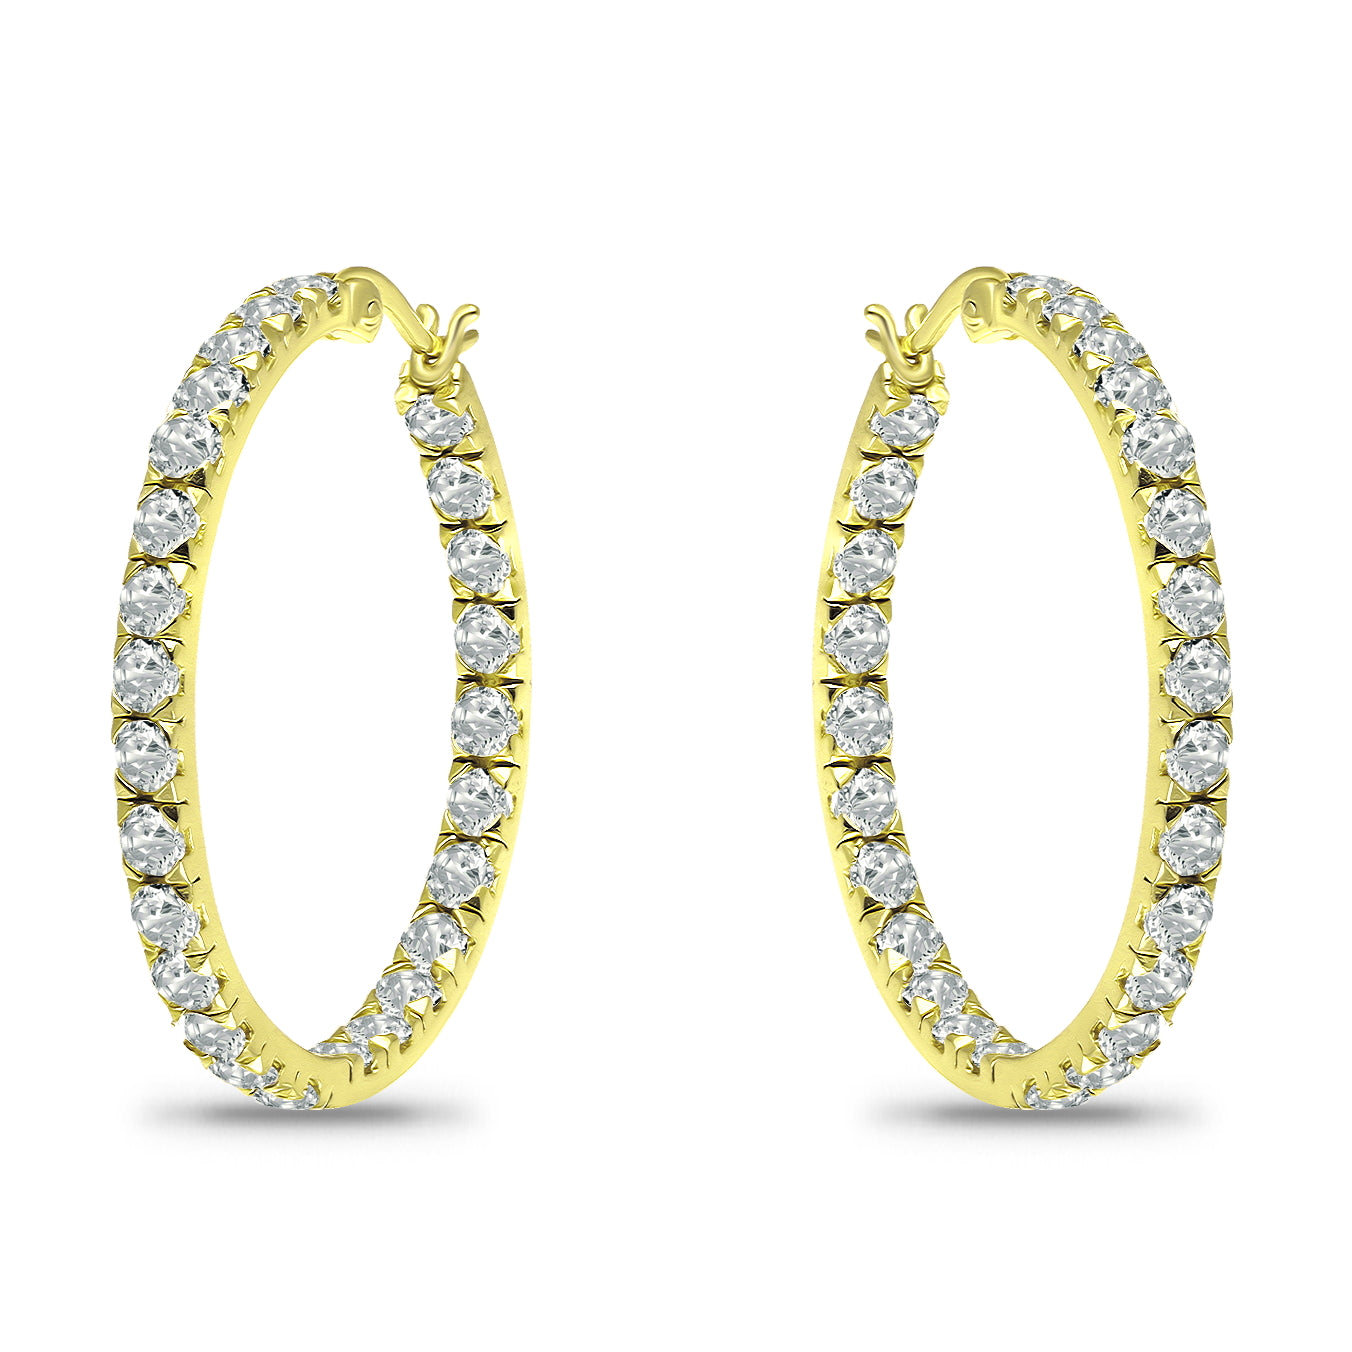 14K Gold Plated Cubic Zirconia Inside Out Hoop Earrings with Sterling Silver Posts